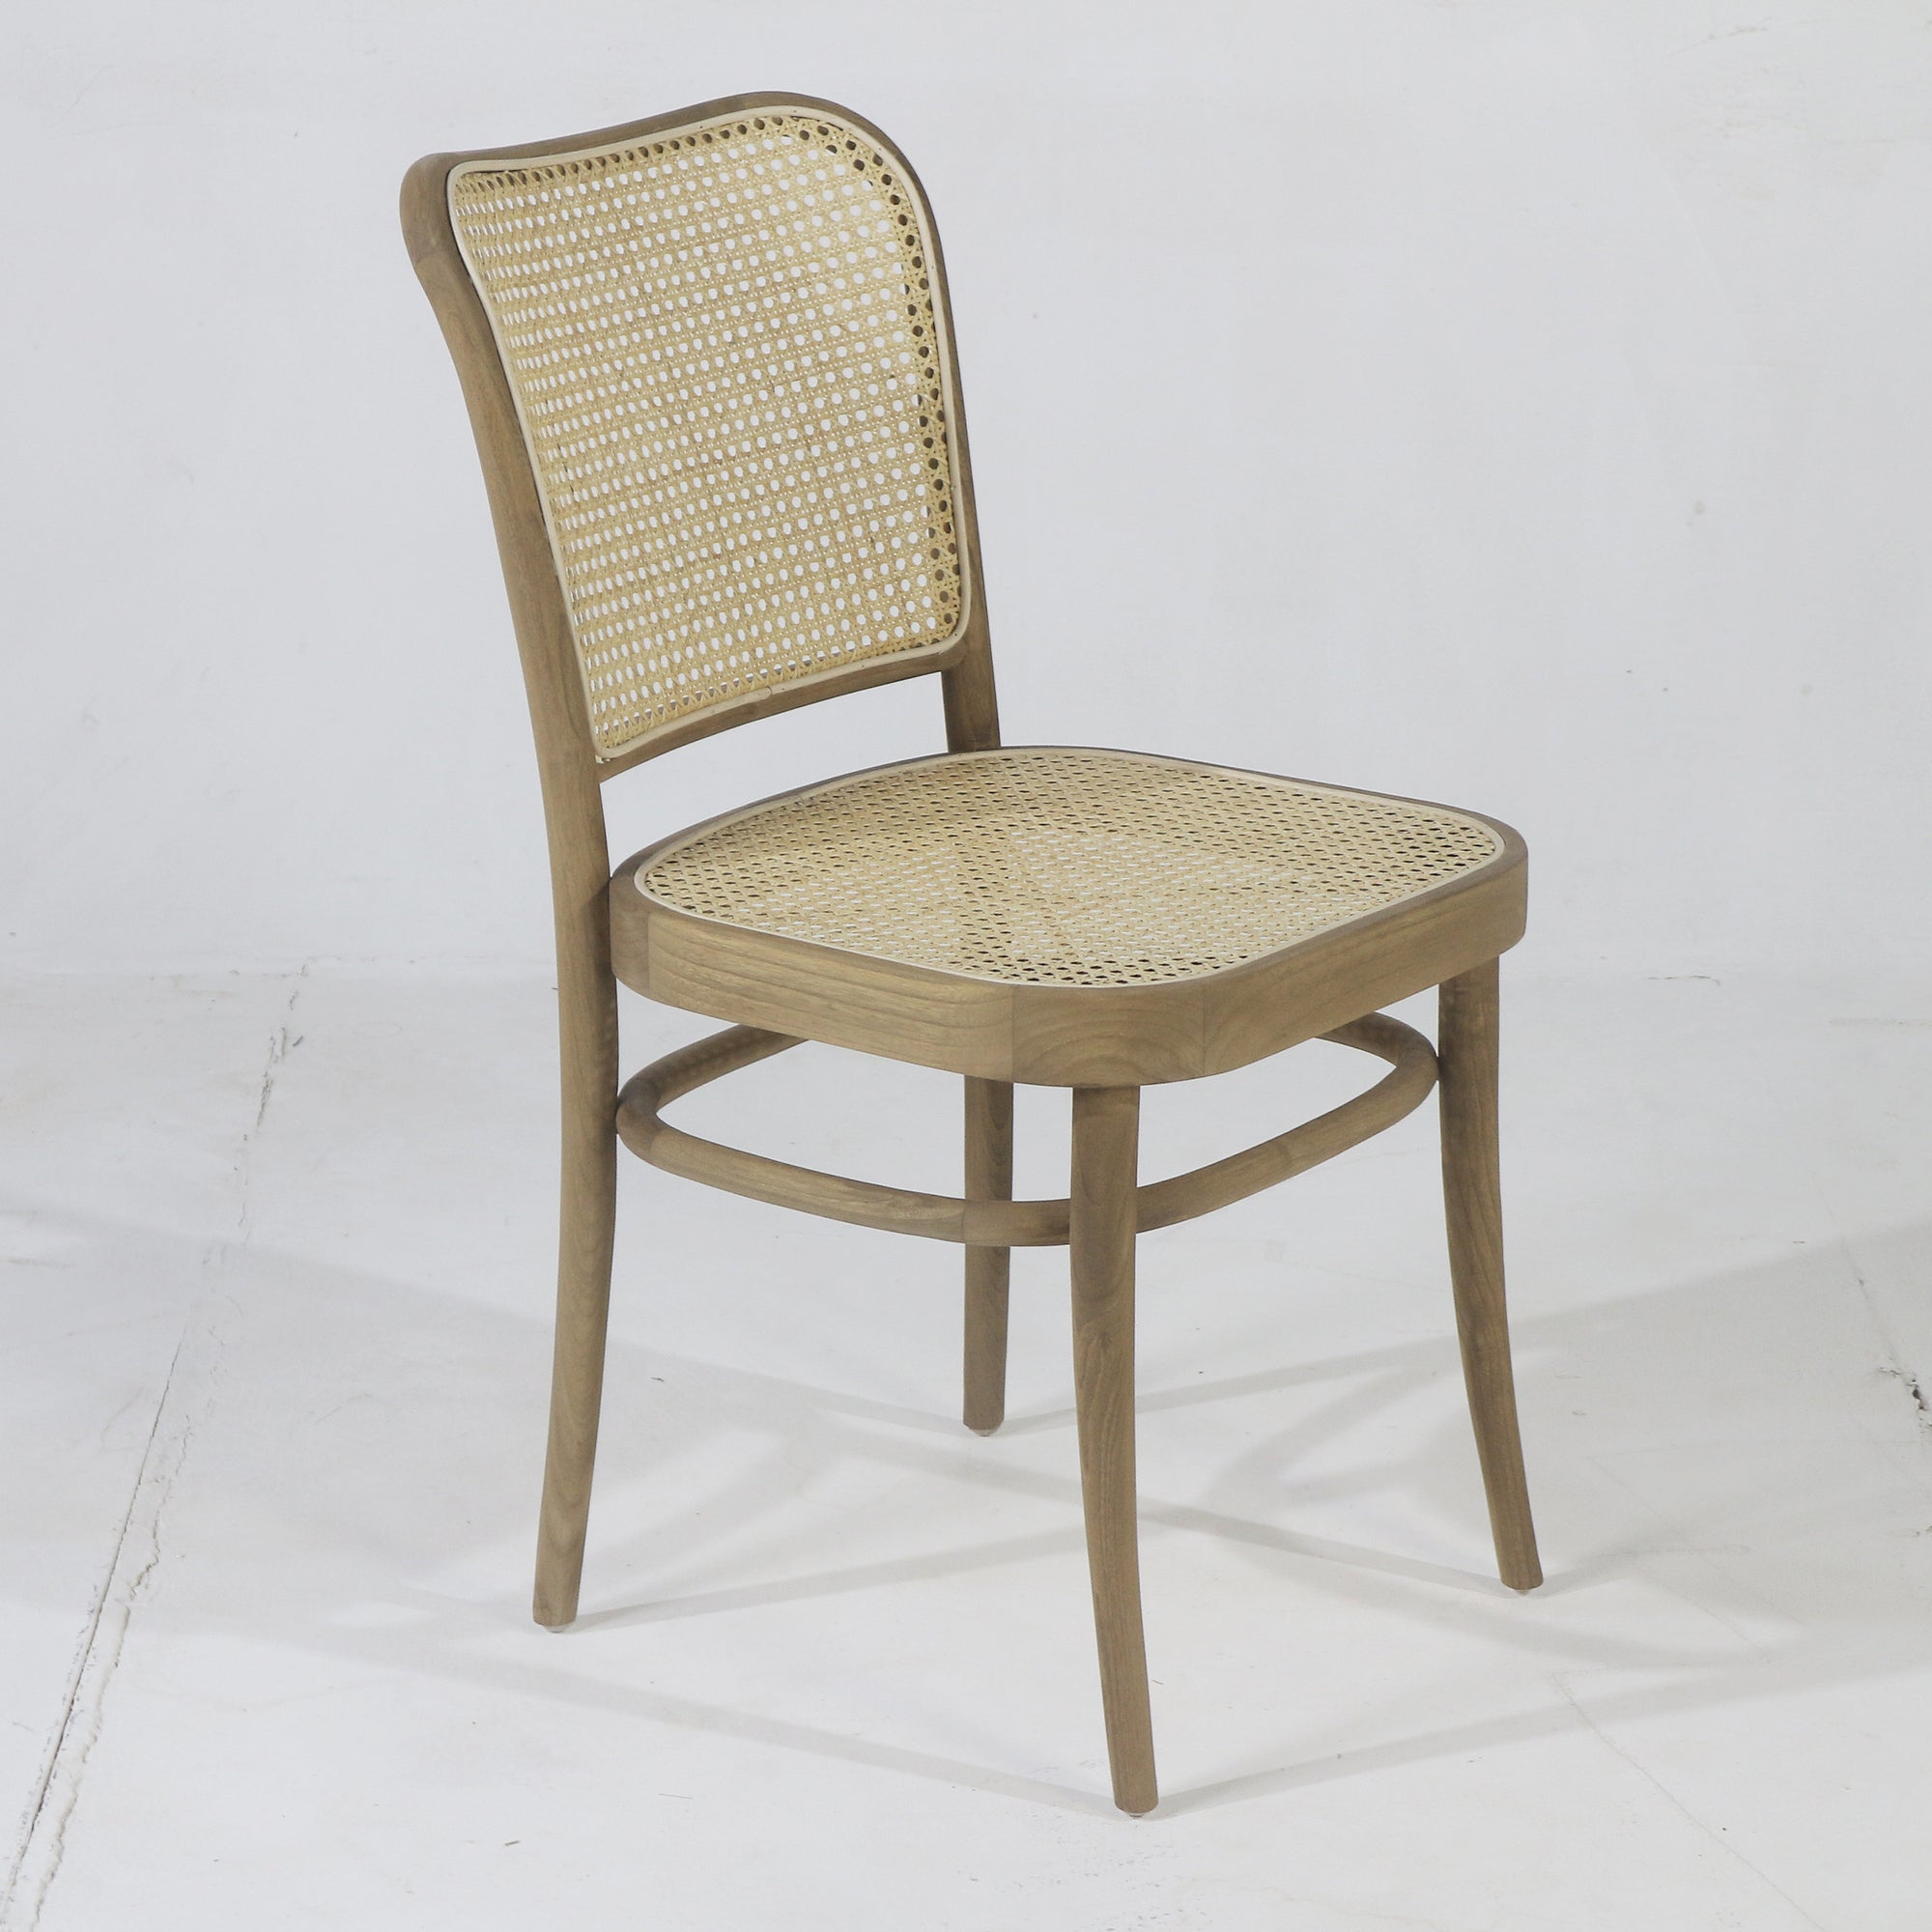 Solvang Oak Dining Chair with Cane Seat - INTERIORTONIC